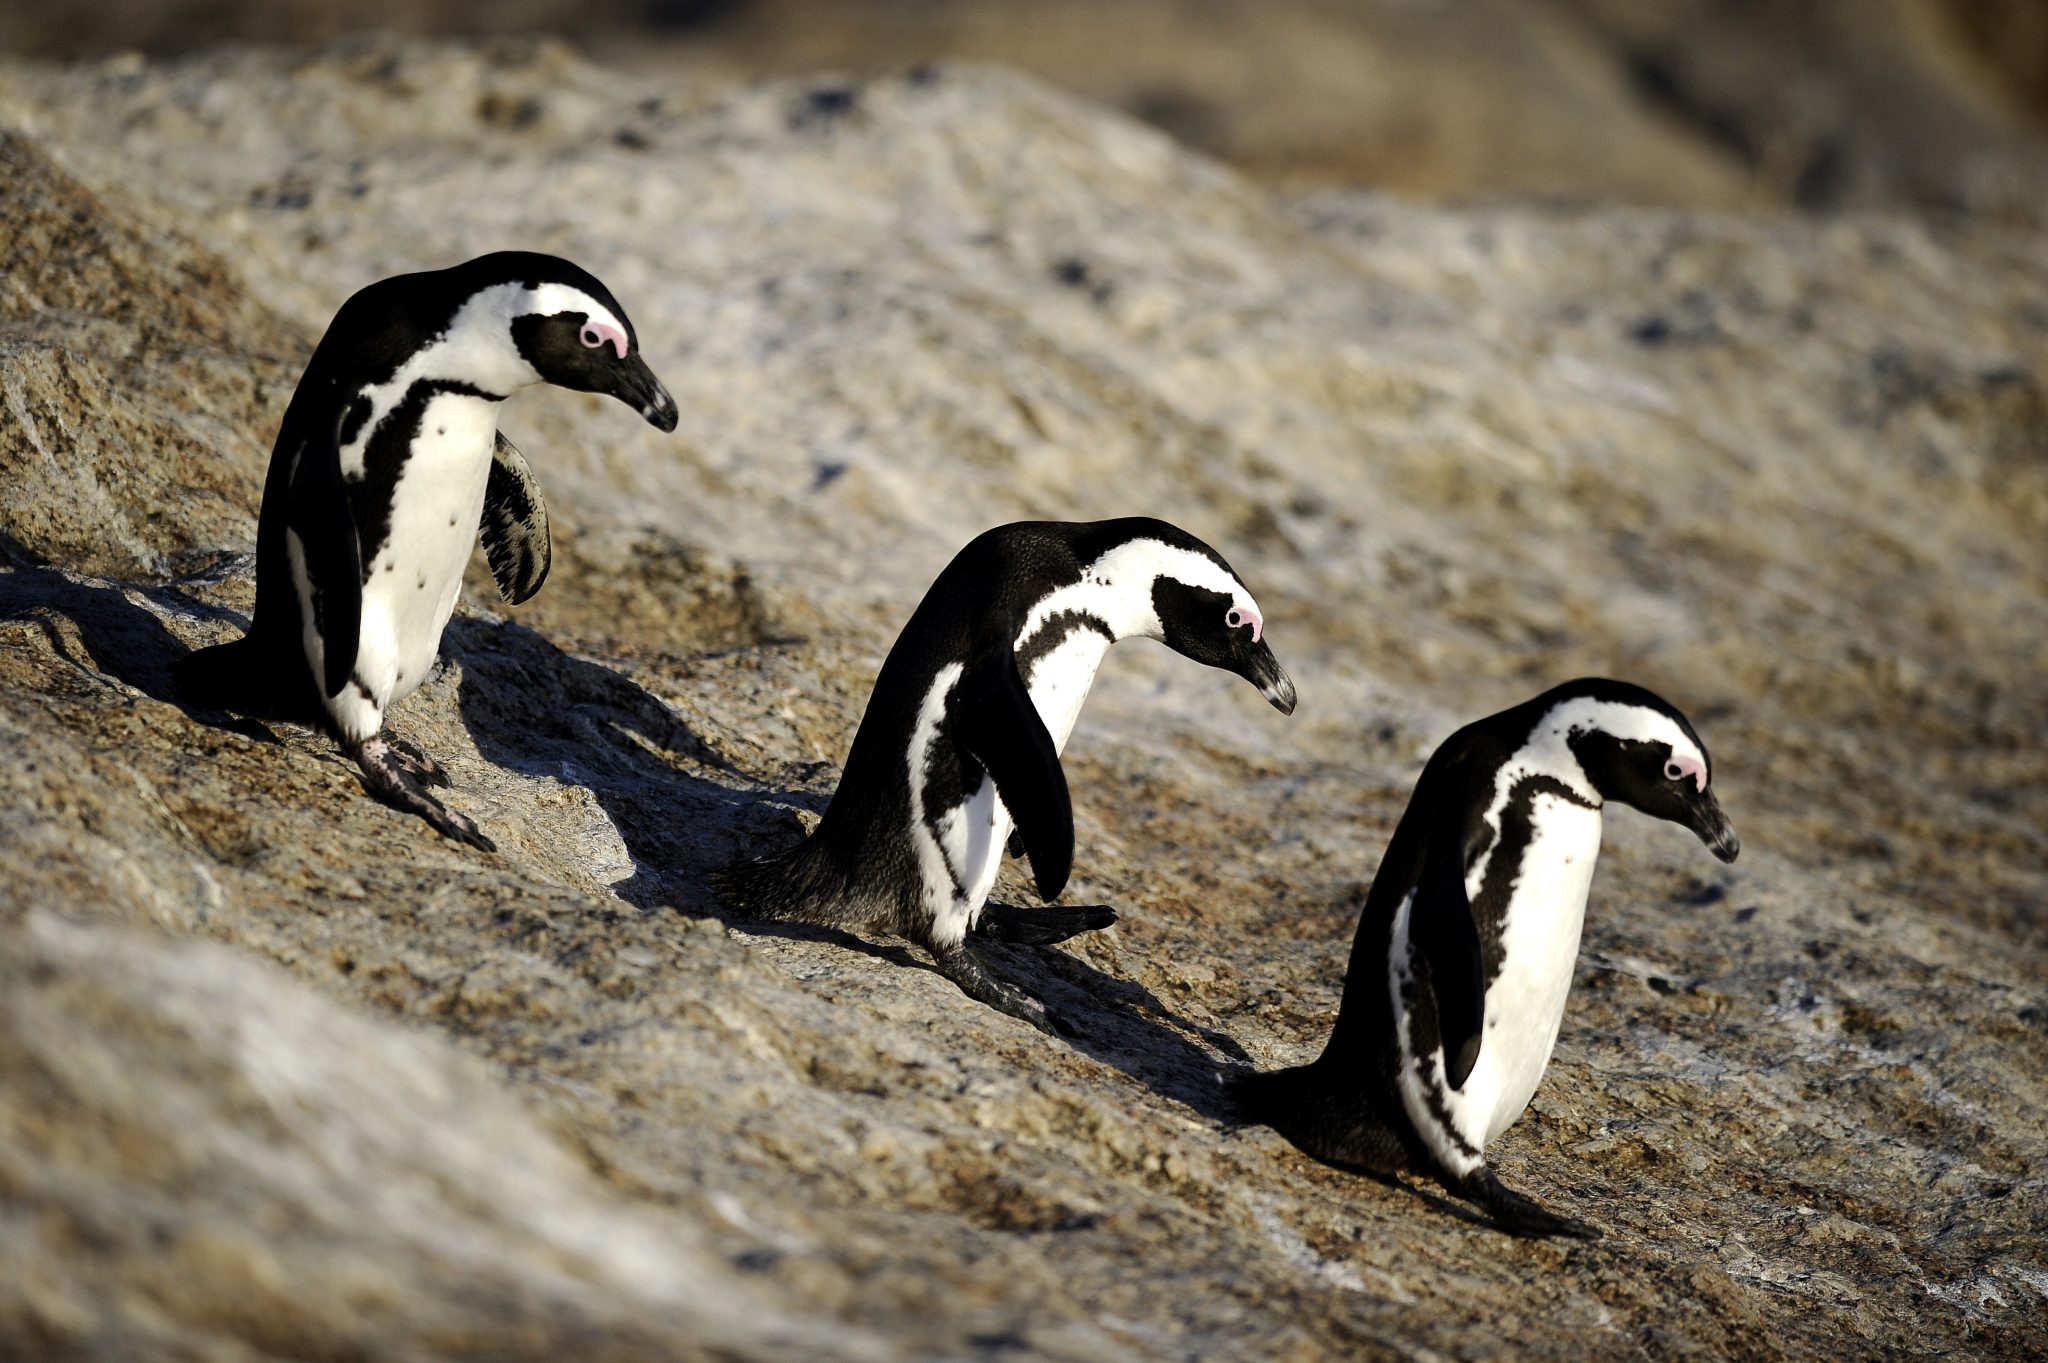 (FILES) This file photo taken on March 16, 2011 shows African penguins in Simon's Town, South Africa.  Endangered, young penguins in southern Africa are confused about where to find food due to climate change and overfishing, and are dying in high numbers as a result, researchers said on February 9, 2017. The report in the journal Current Biology describes a dire predicament for African penguins, whose young population is projected to be down 50 percent in some of the most affected areas of Namibia and South Africa.  / AFP PHOTO / STEPHANE DE SAKUTIN